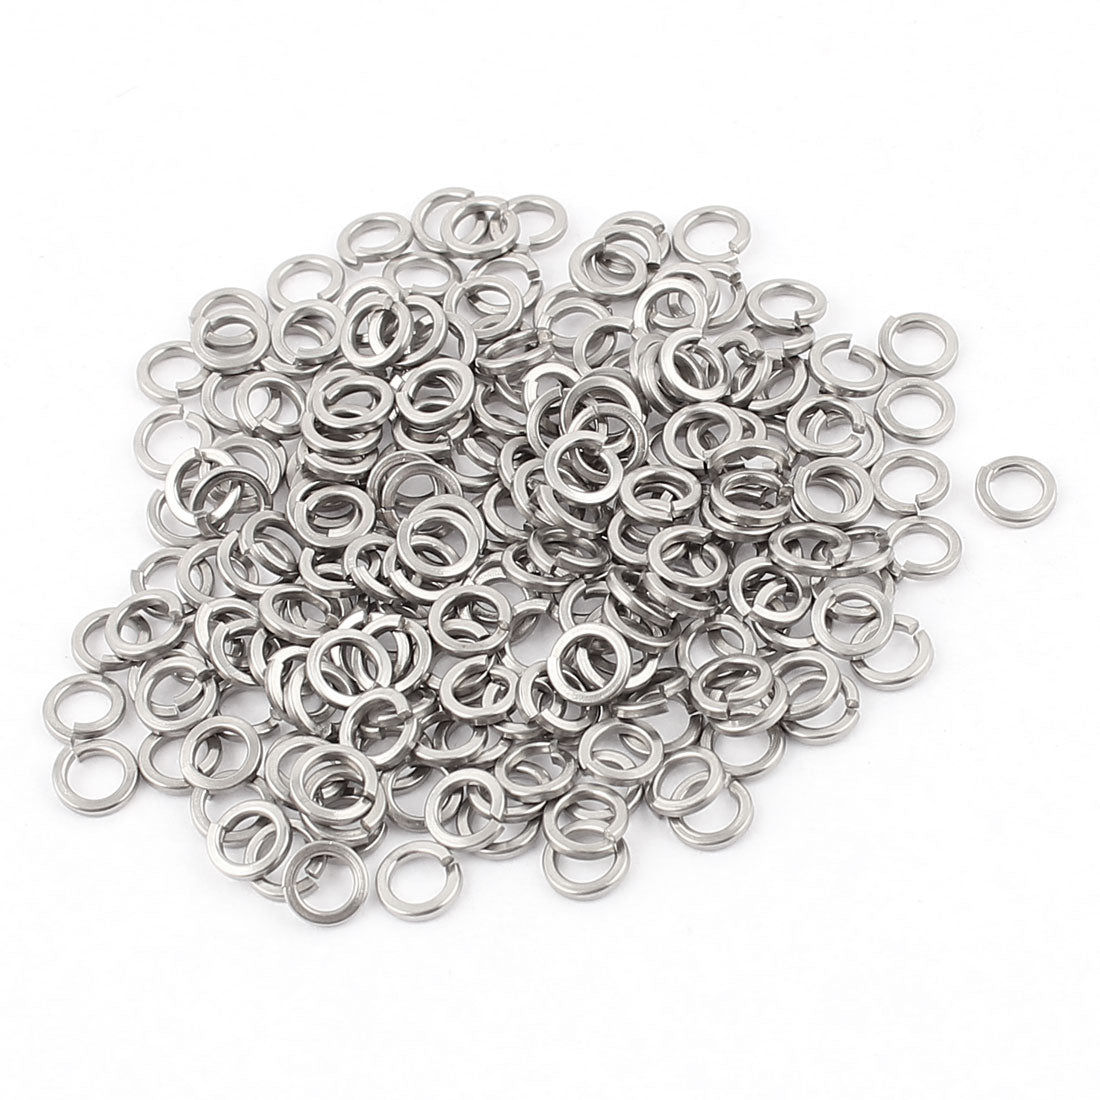 uxcell Uxcell 200pcs 304 Stainless Steel M3 Split Lock Spring Washers Pad Gasket